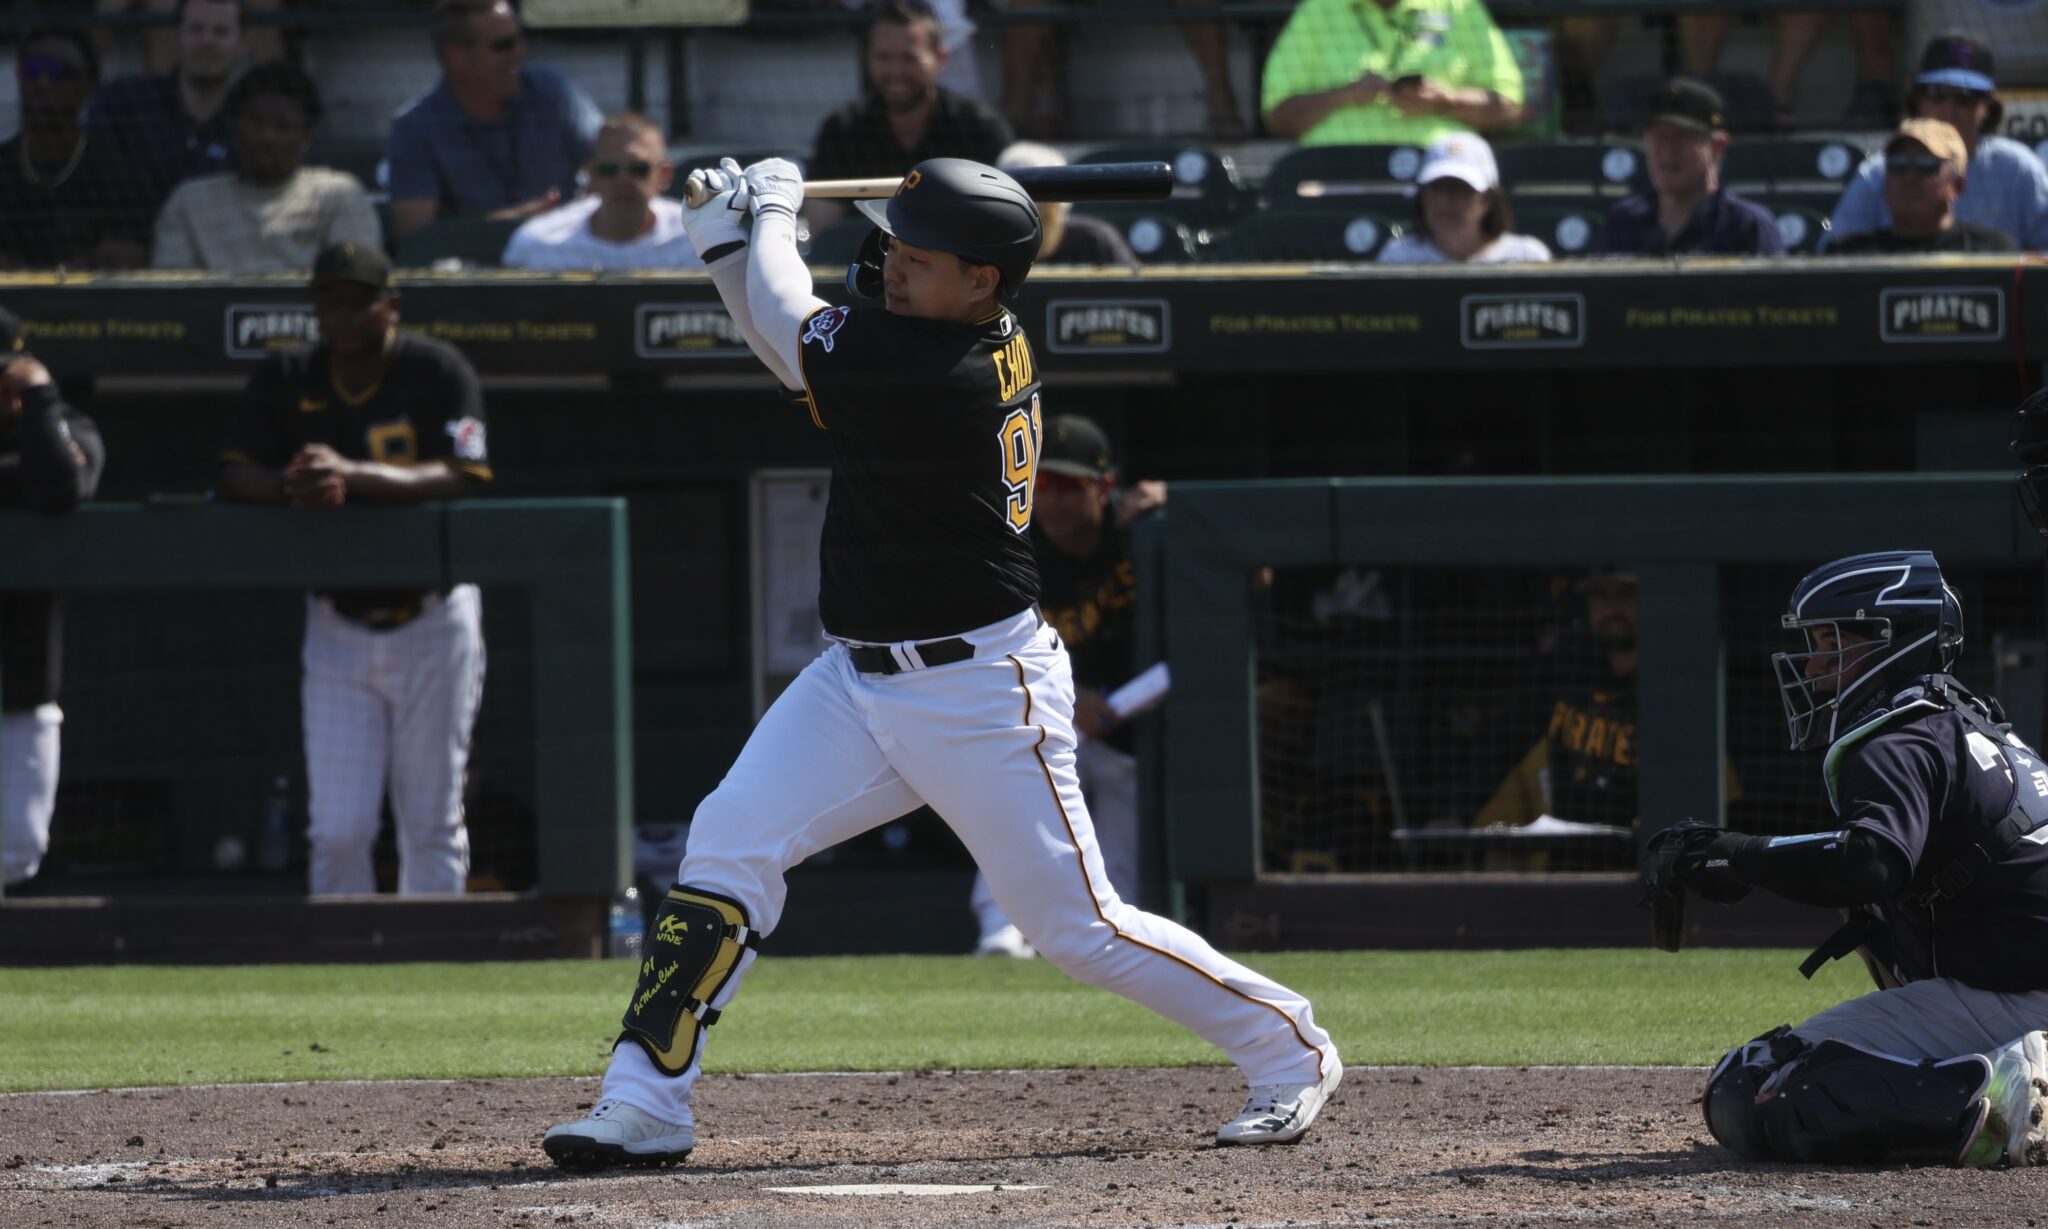 Pittsburgh Pirates on X: With his home run last night, Cutch